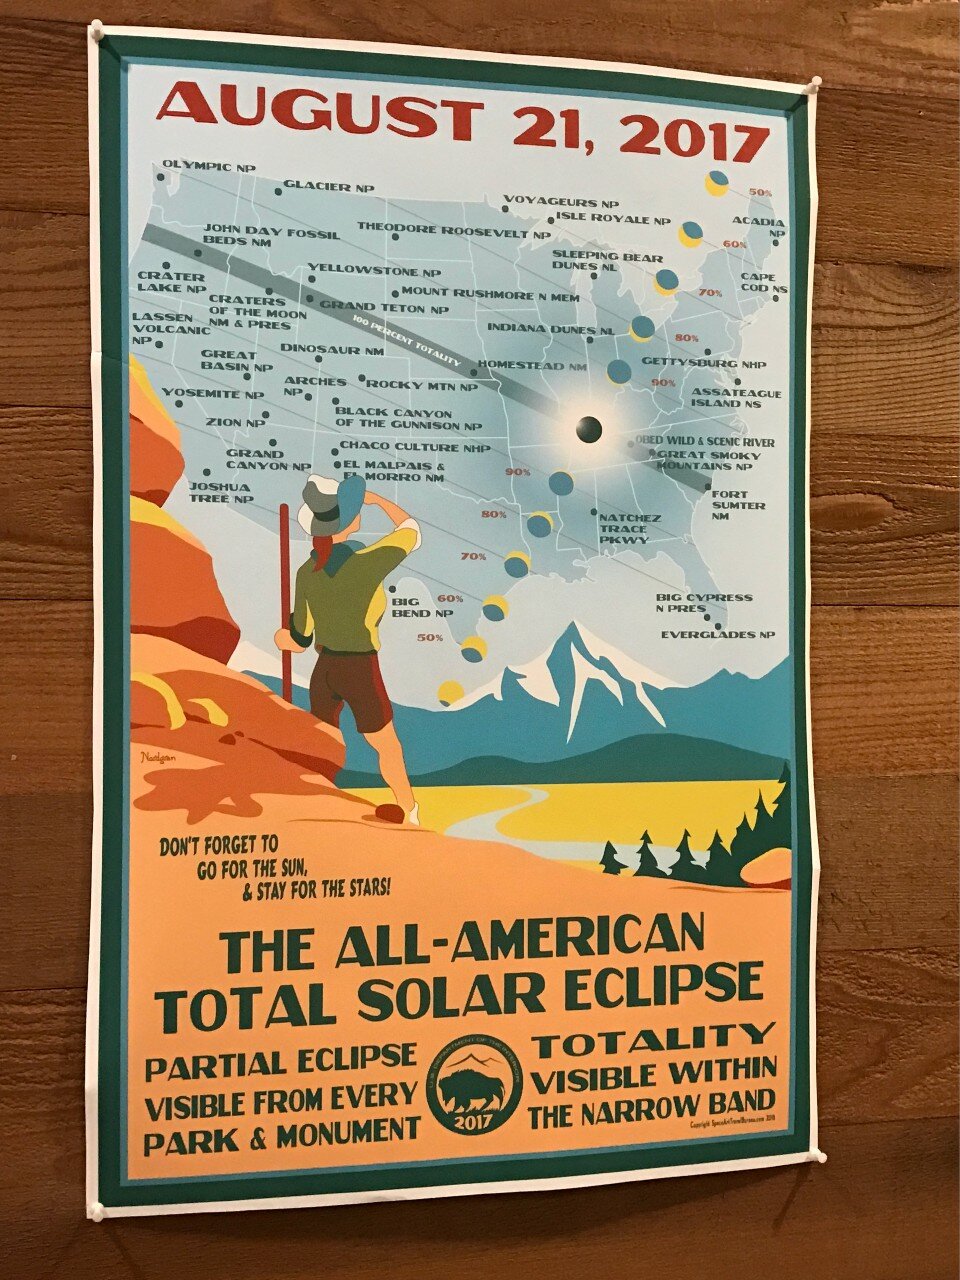  Poster of US National Parks for Nov 2017 eclipse viewing, photo by Dee Caputo 